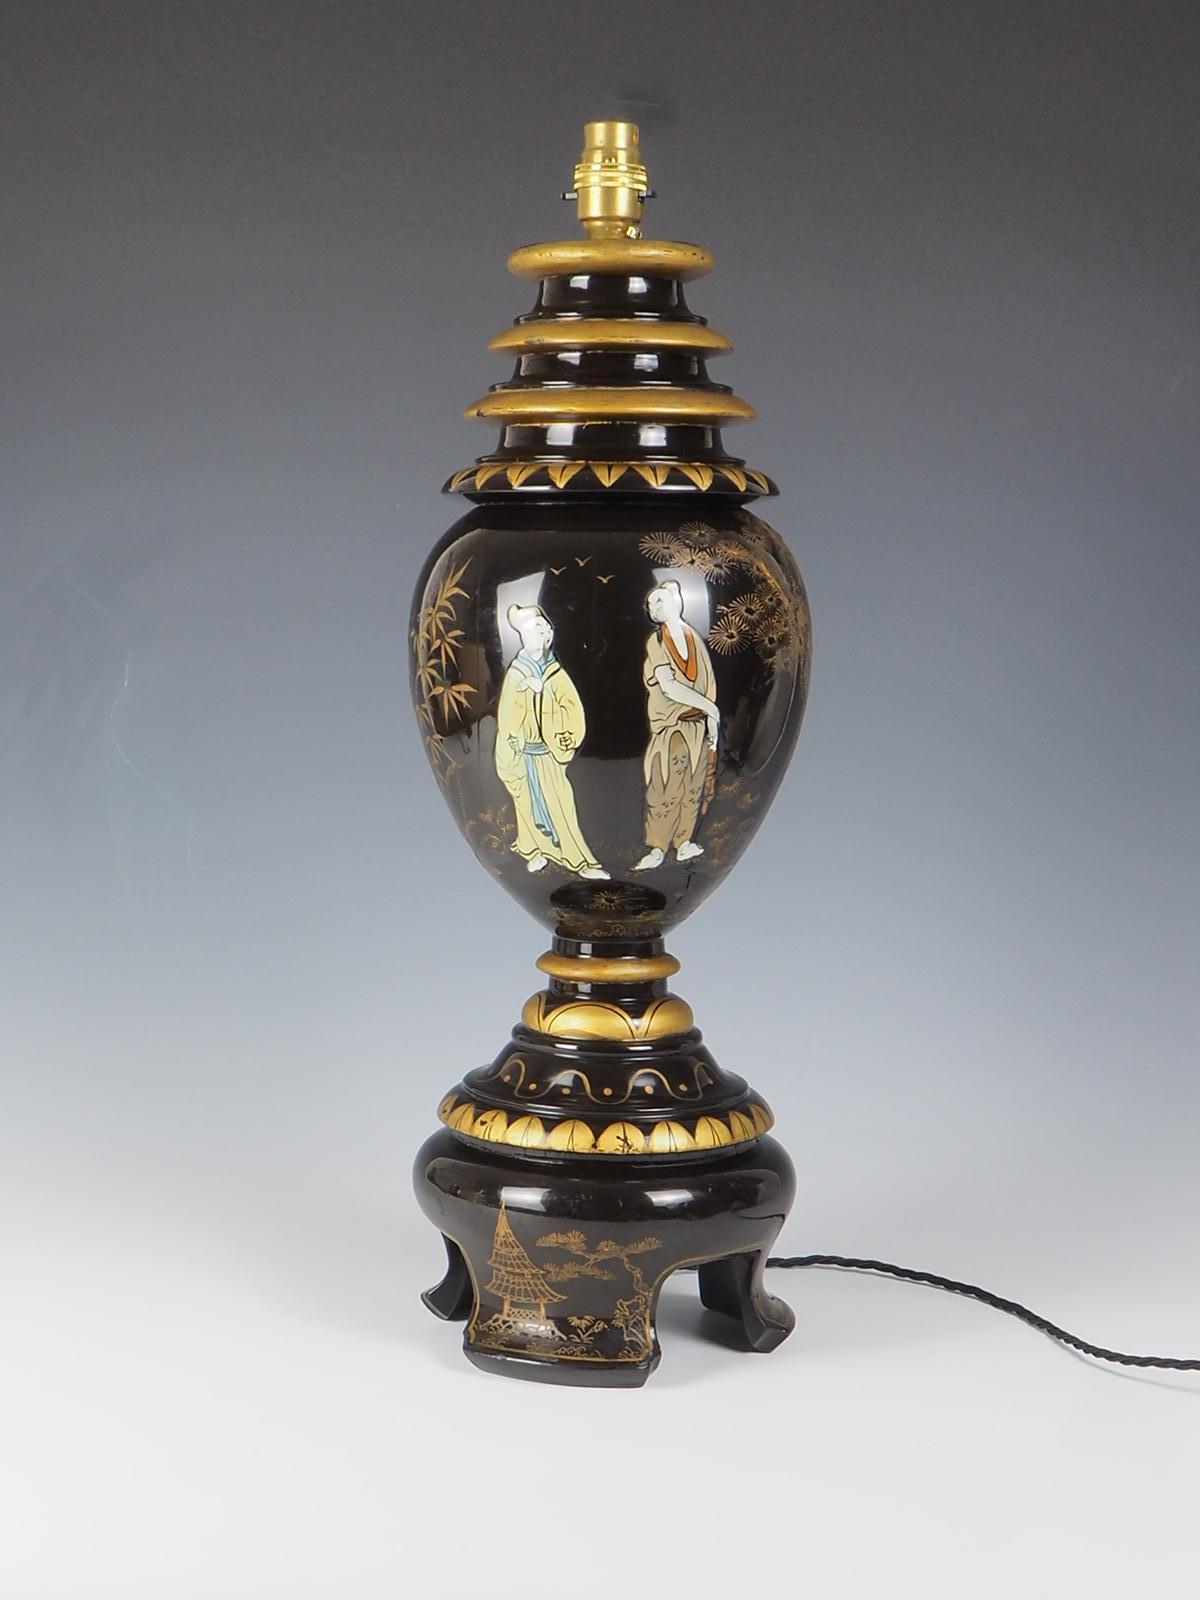 Elegant Chinoiserie Antique Table Lamp. This exquisite lamp showcases the perfect blend of timeless elegance and intricate Chinoiserie design. Crafted with meticulous attention to detail, it effortlessly combines charm with a touch of